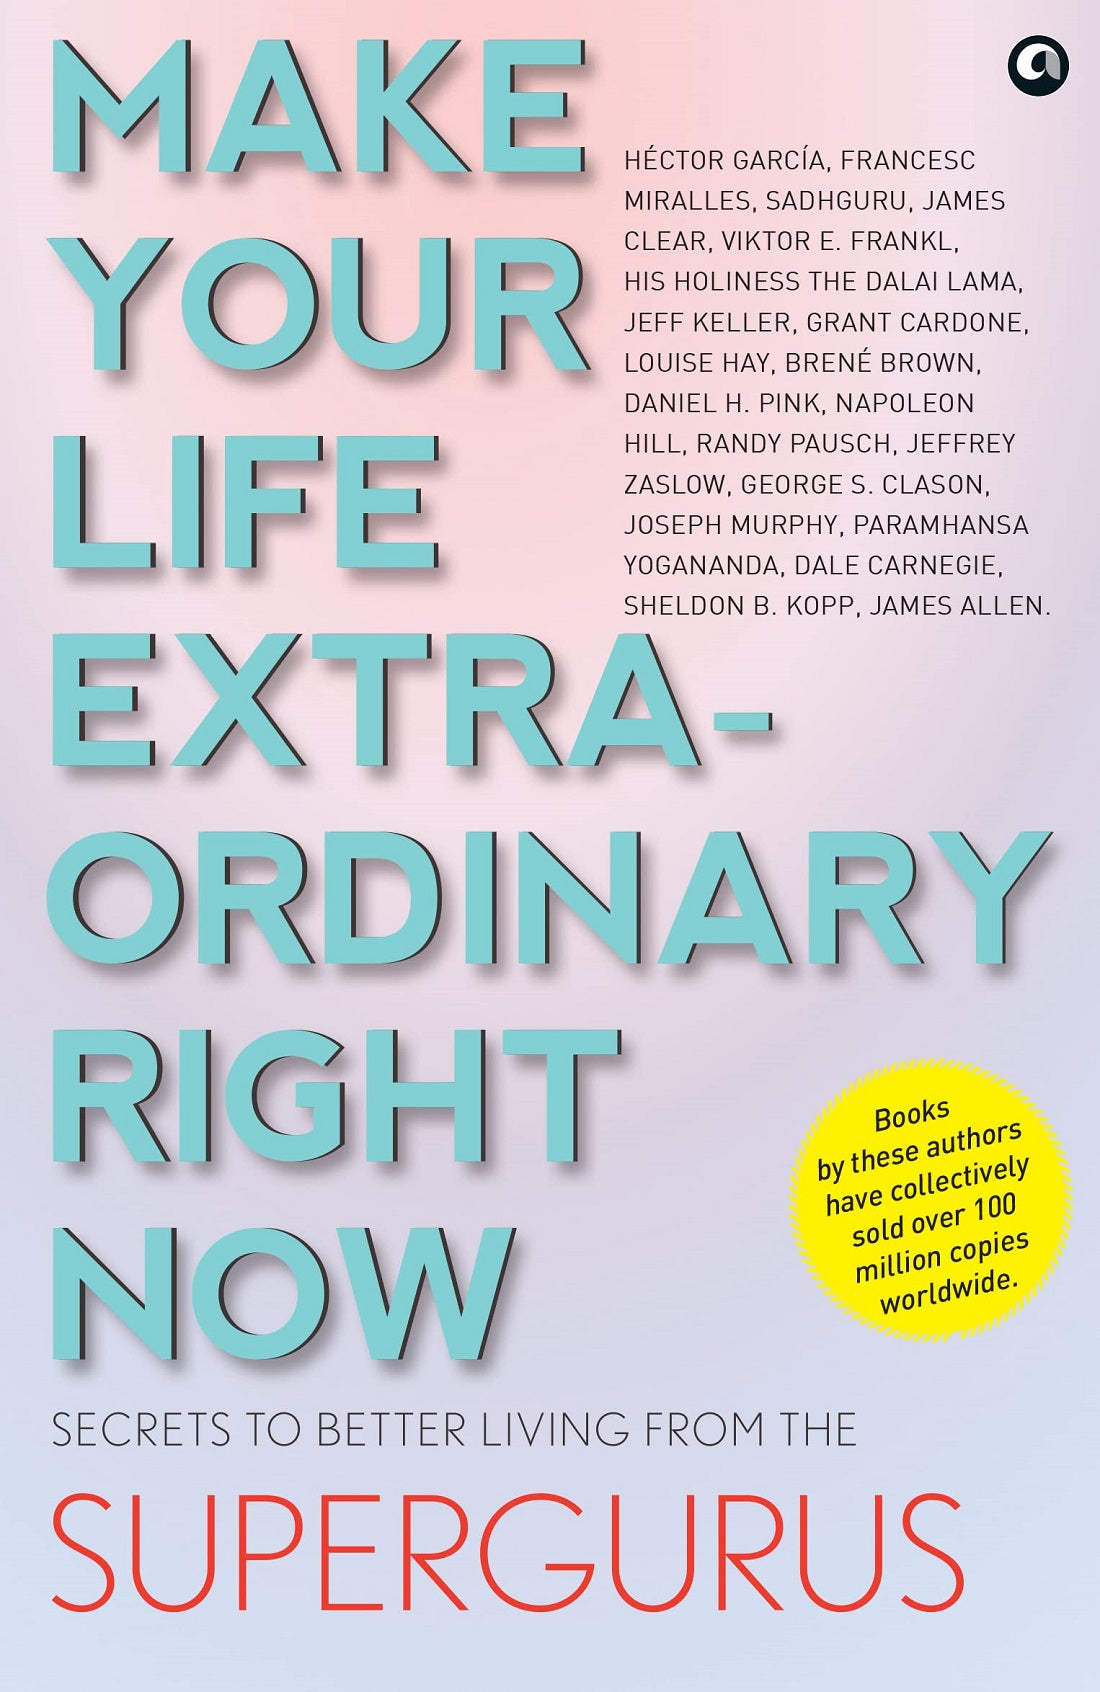 MAKE YOUR LIFE EXTRAORDINARY RIGHT NOW